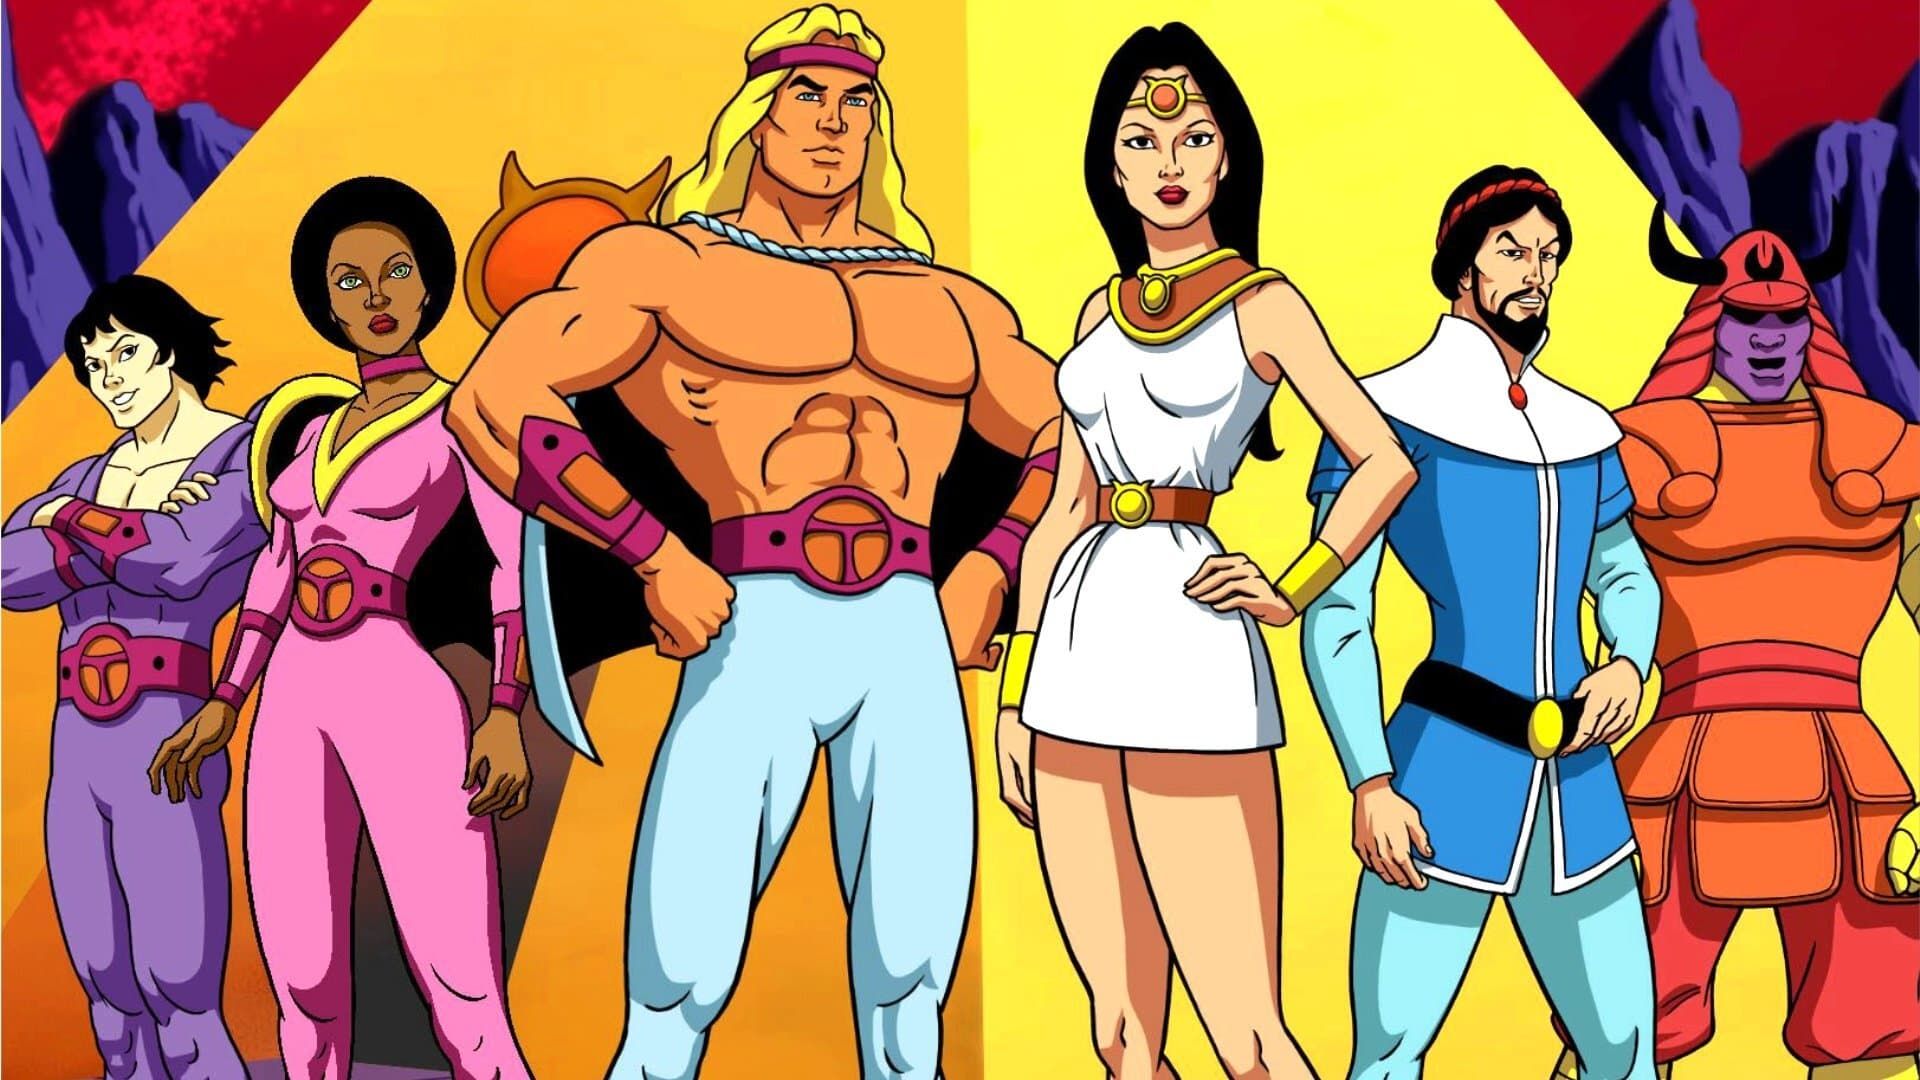 The Freedom Force background